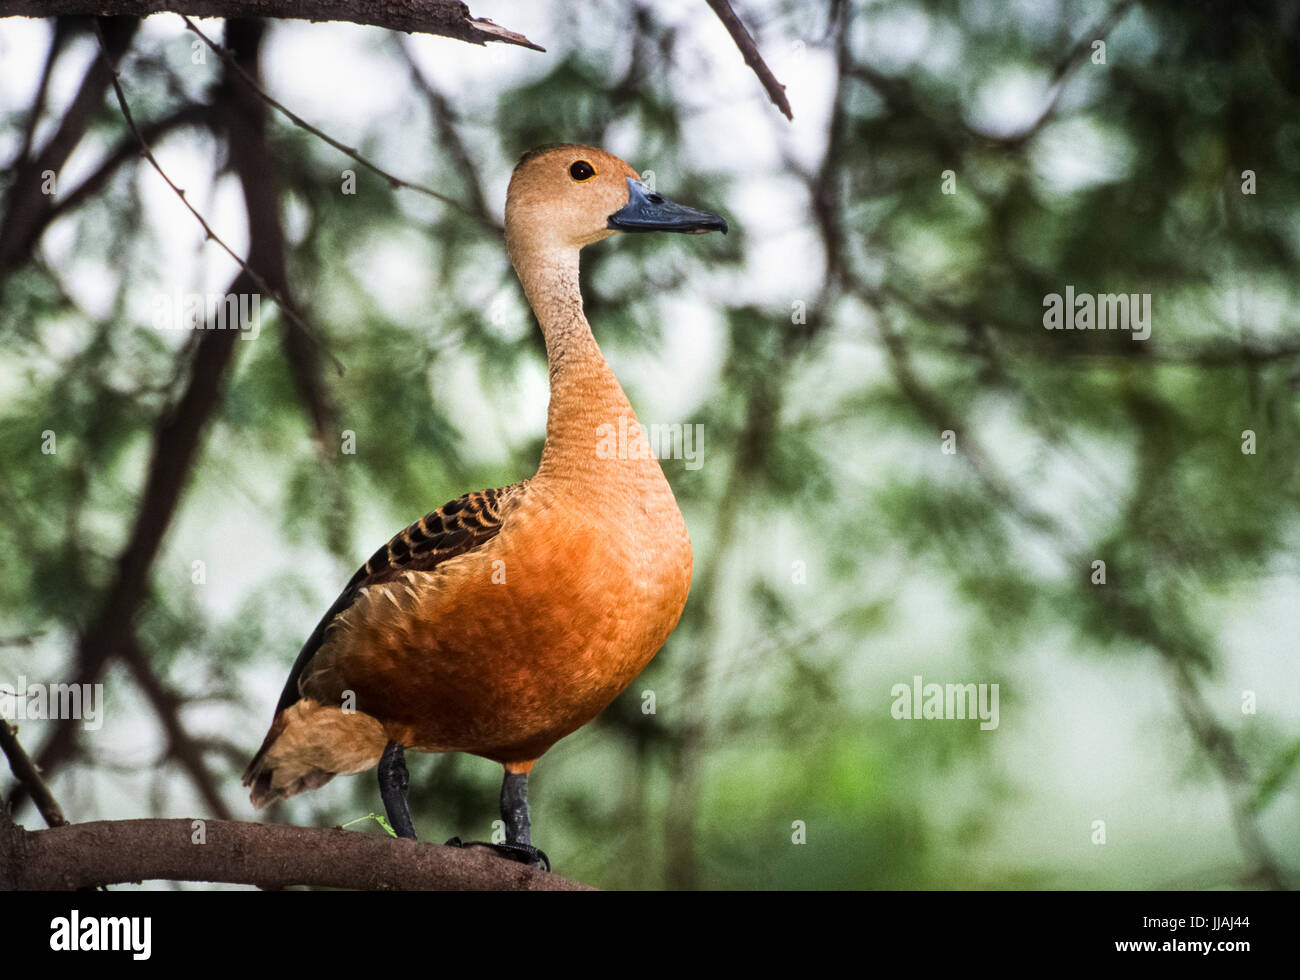 Lesser Whistling Duck,(Dendrocygna javanica),also known as Indian Whistling Duck or Lesser Whistling Teal, in tree, Keoladeo Ghana National Park,India Stock Photo